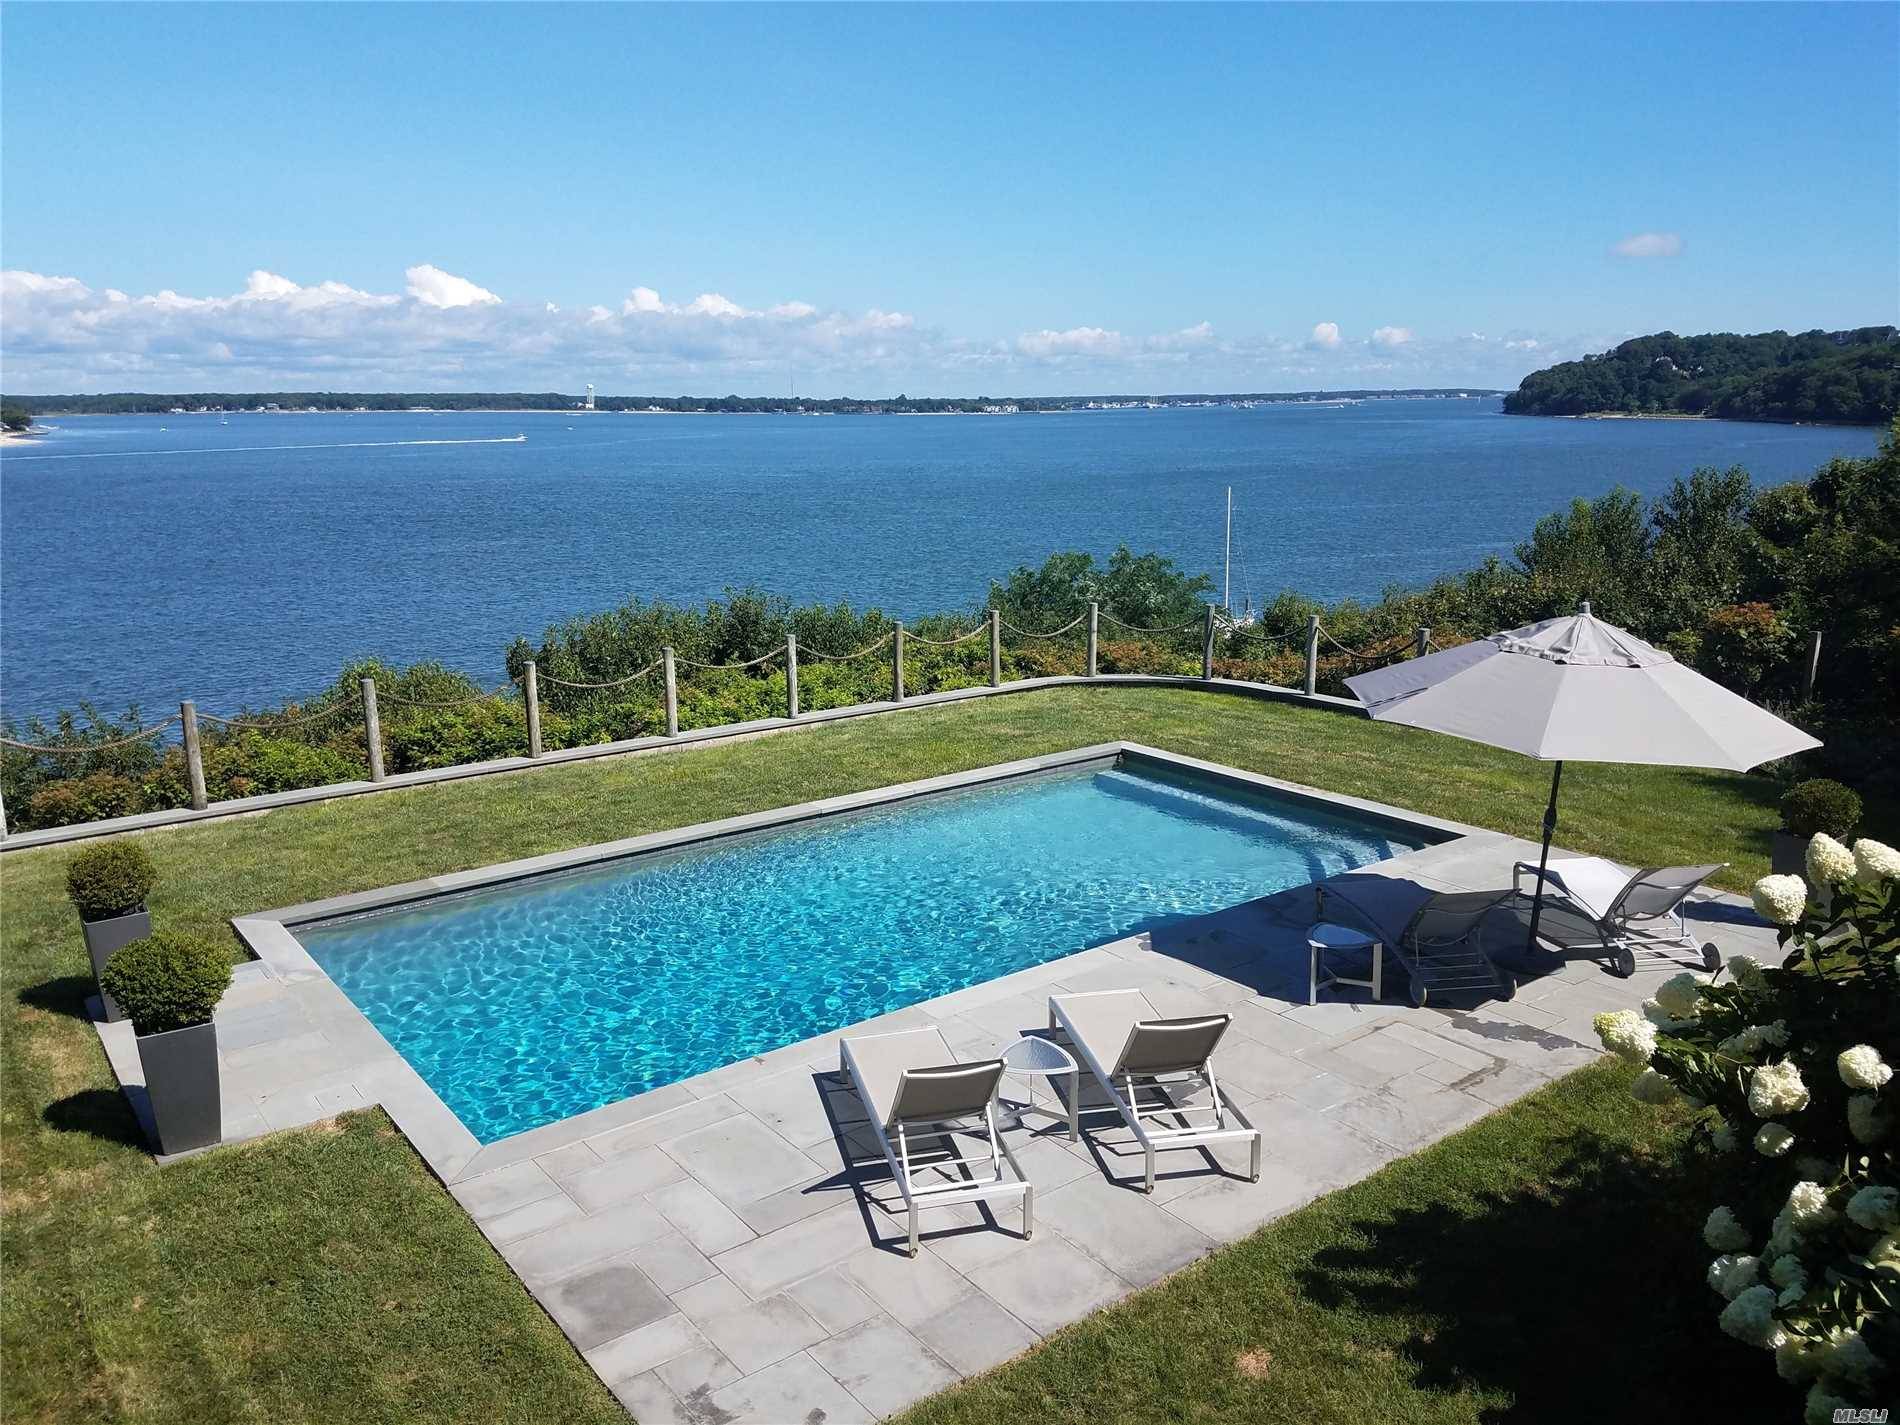 This Stunning Property Offers Elevated, Panoramic Views Of The Sound.